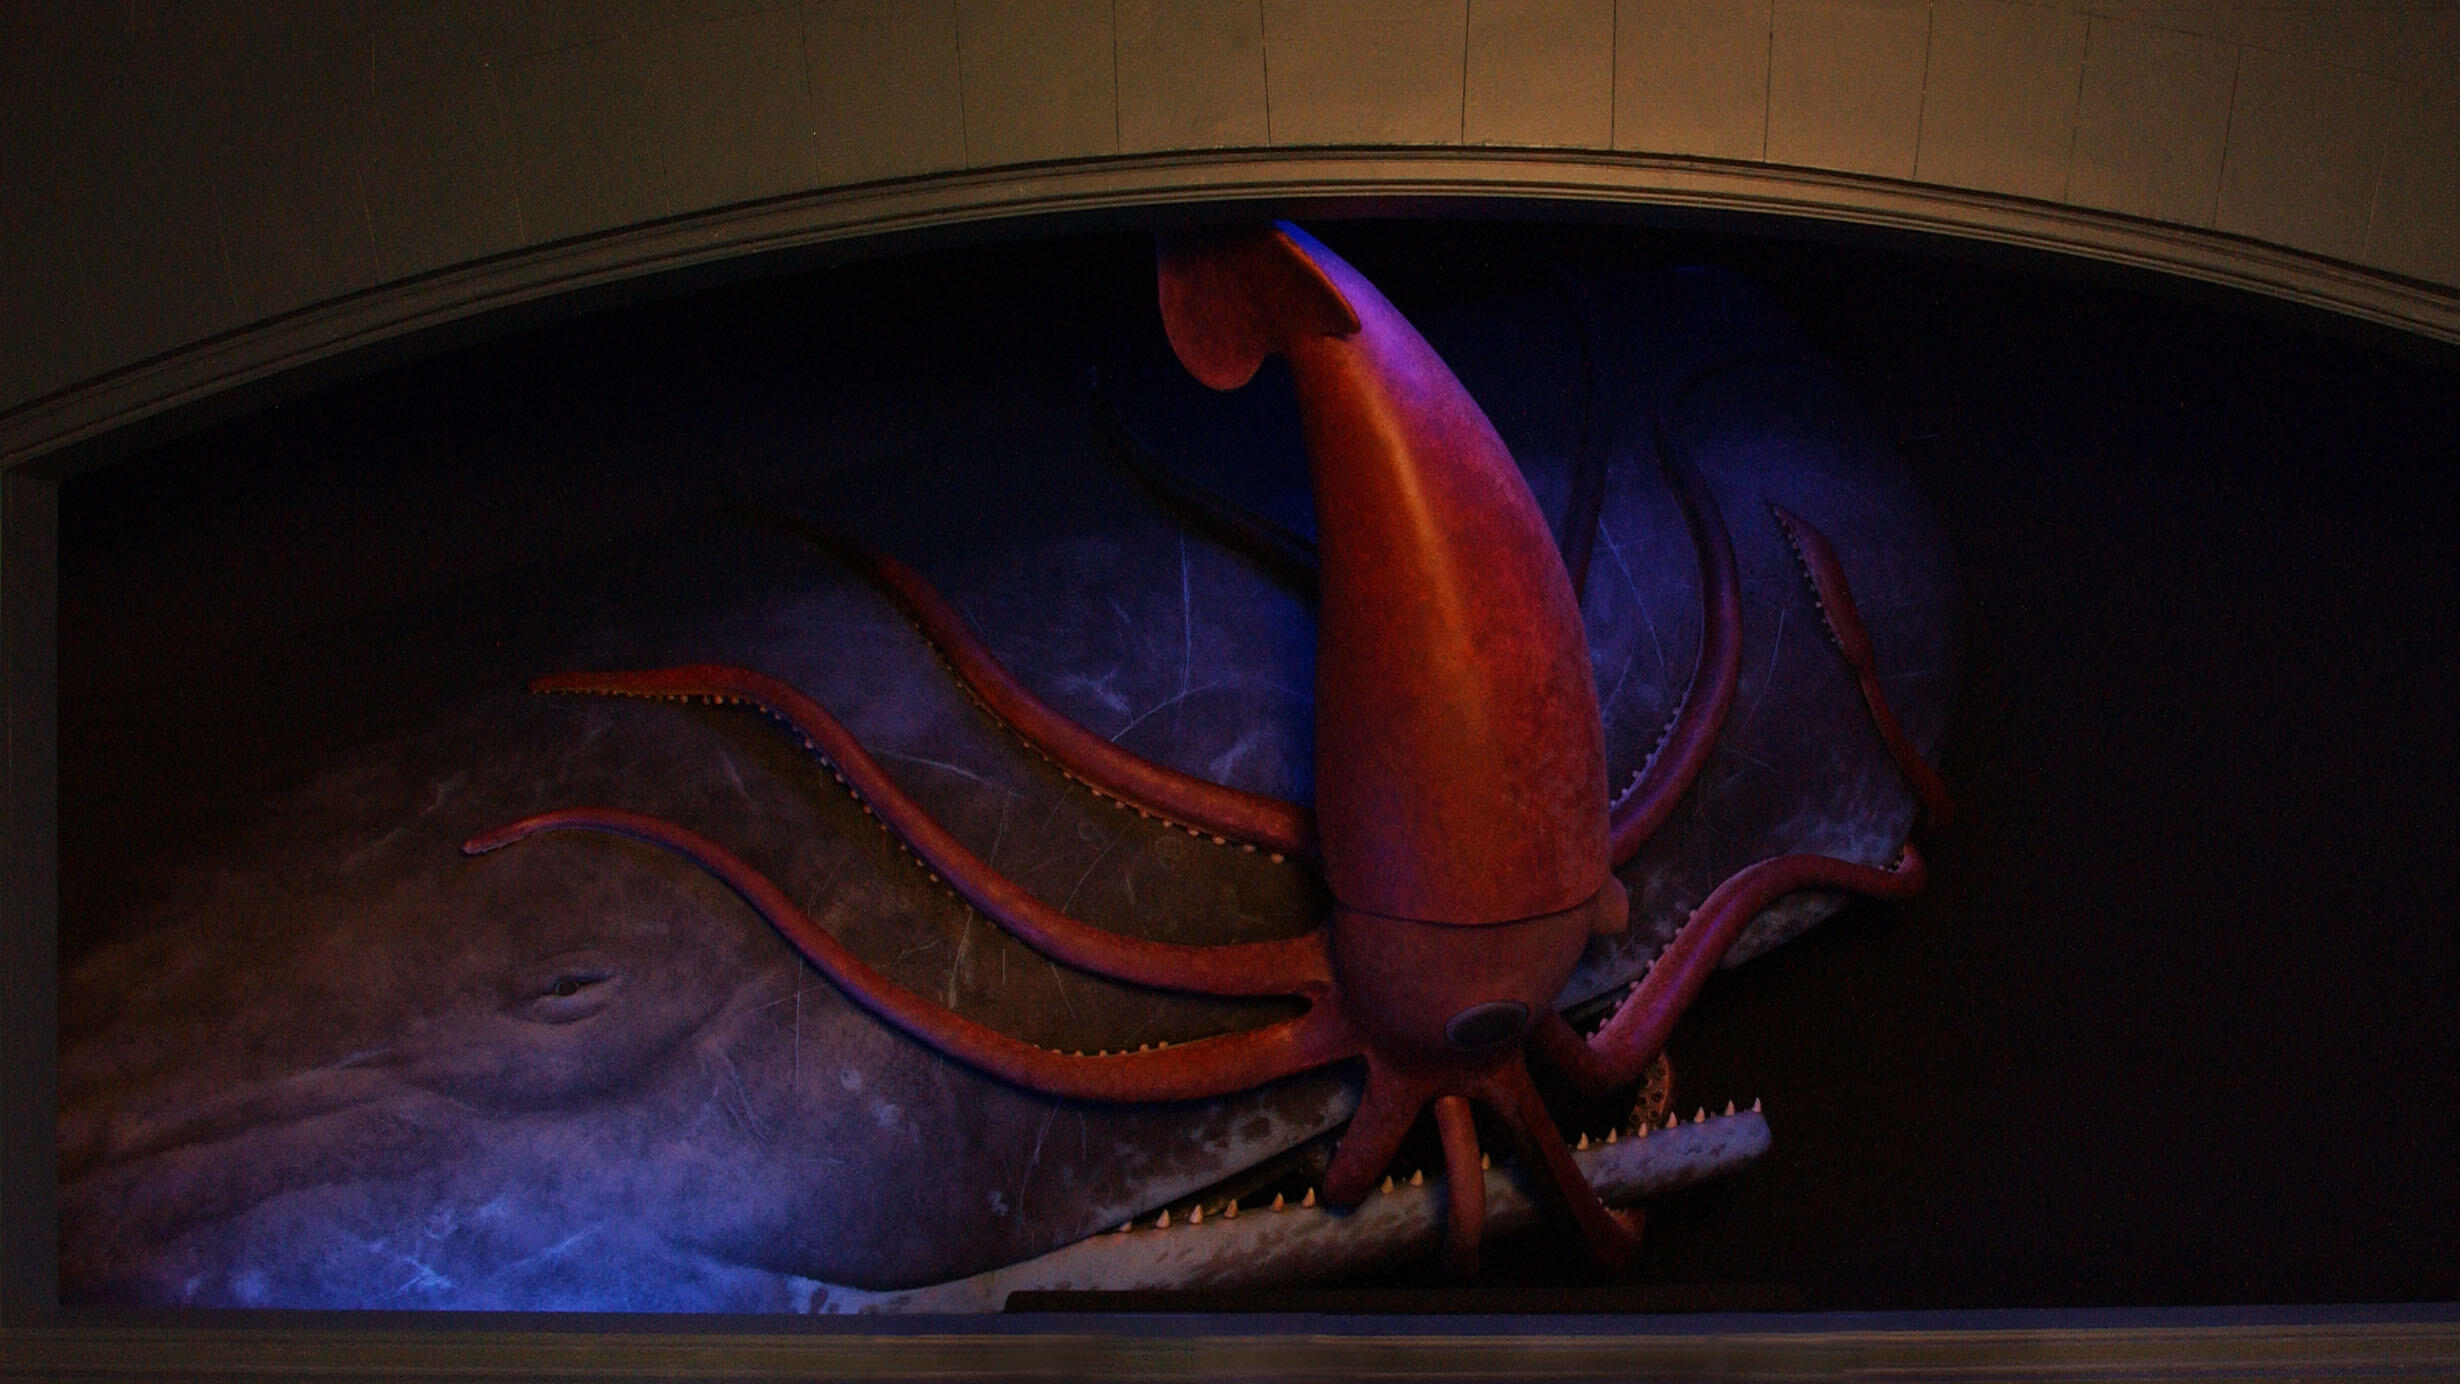 Museum diorama depicts a sperm whale attacking a giant squid.